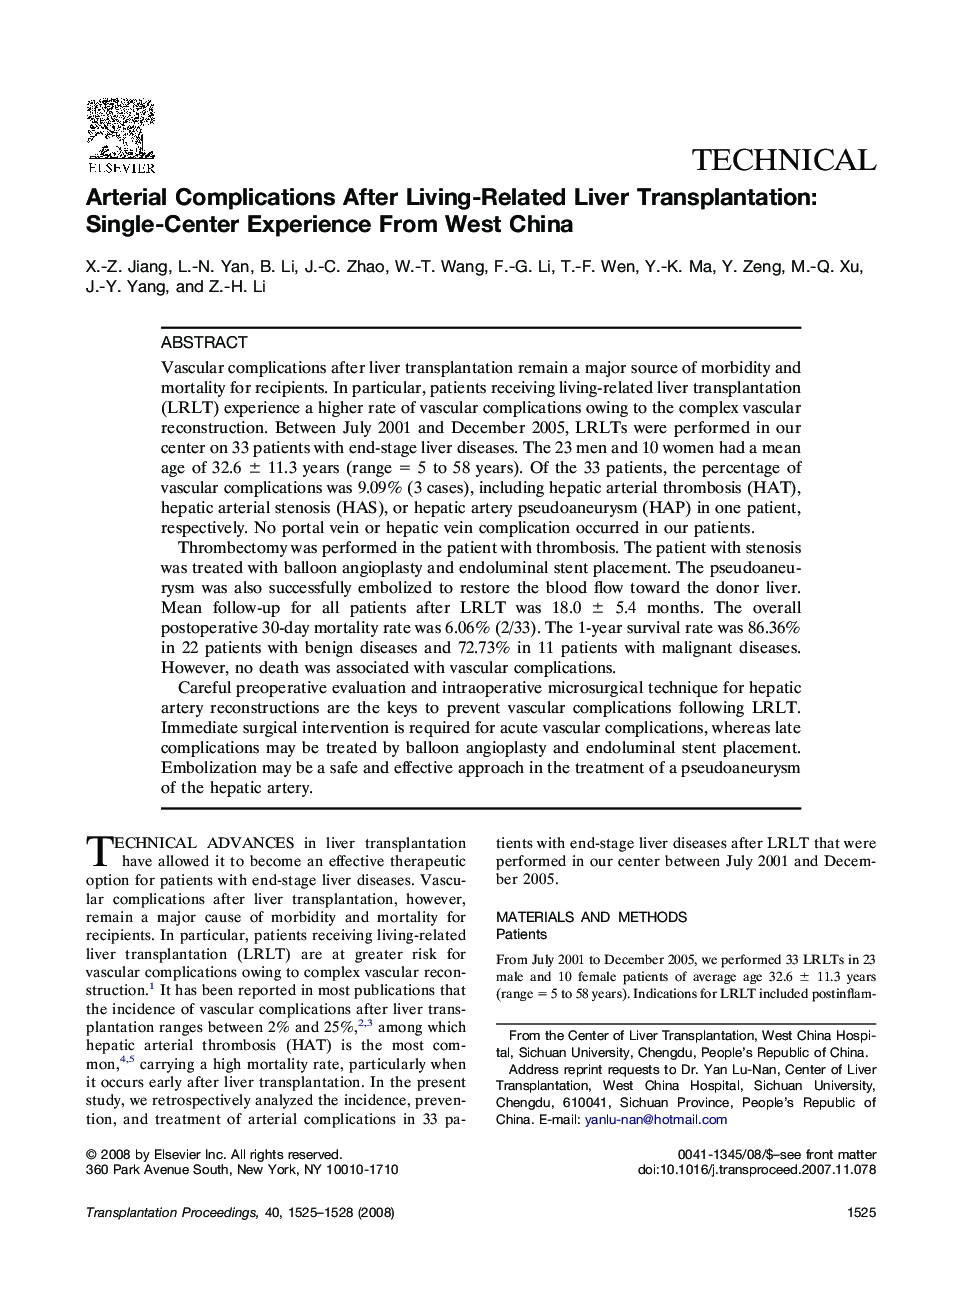 Arterial Complications After Living-Related Liver Transplantation: Single-Center Experience From West China